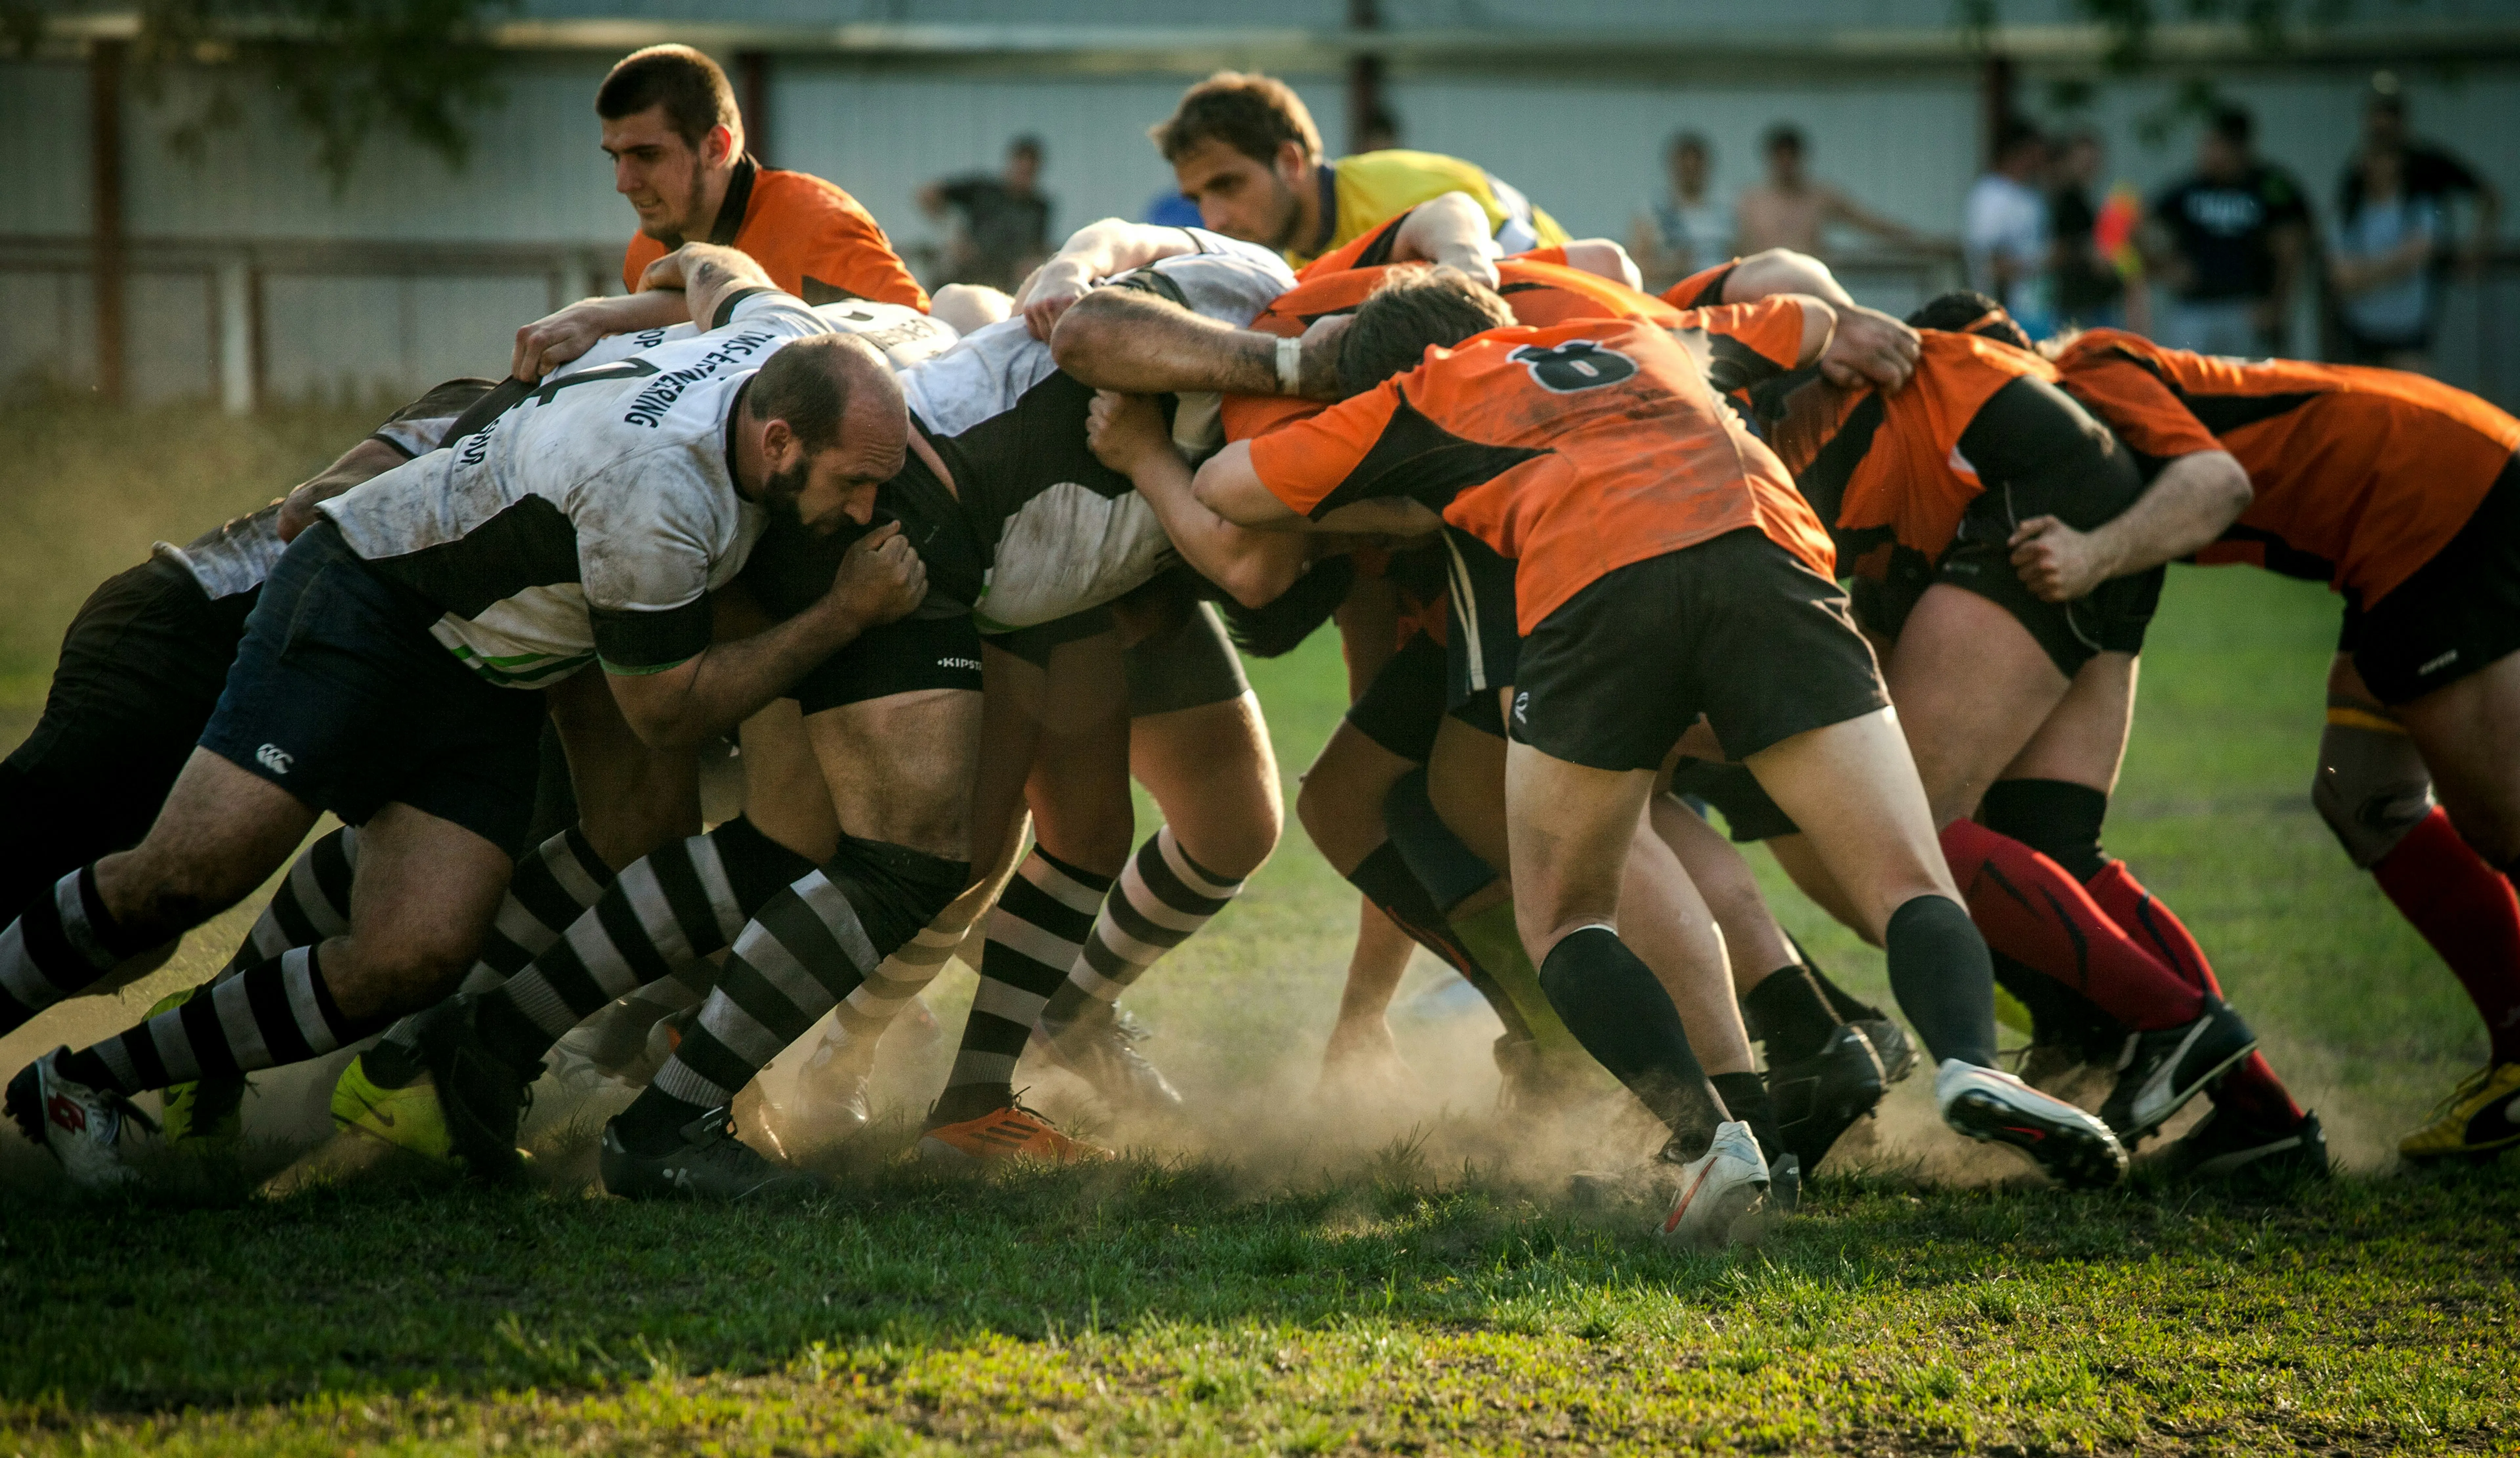 Scrum of rugby players